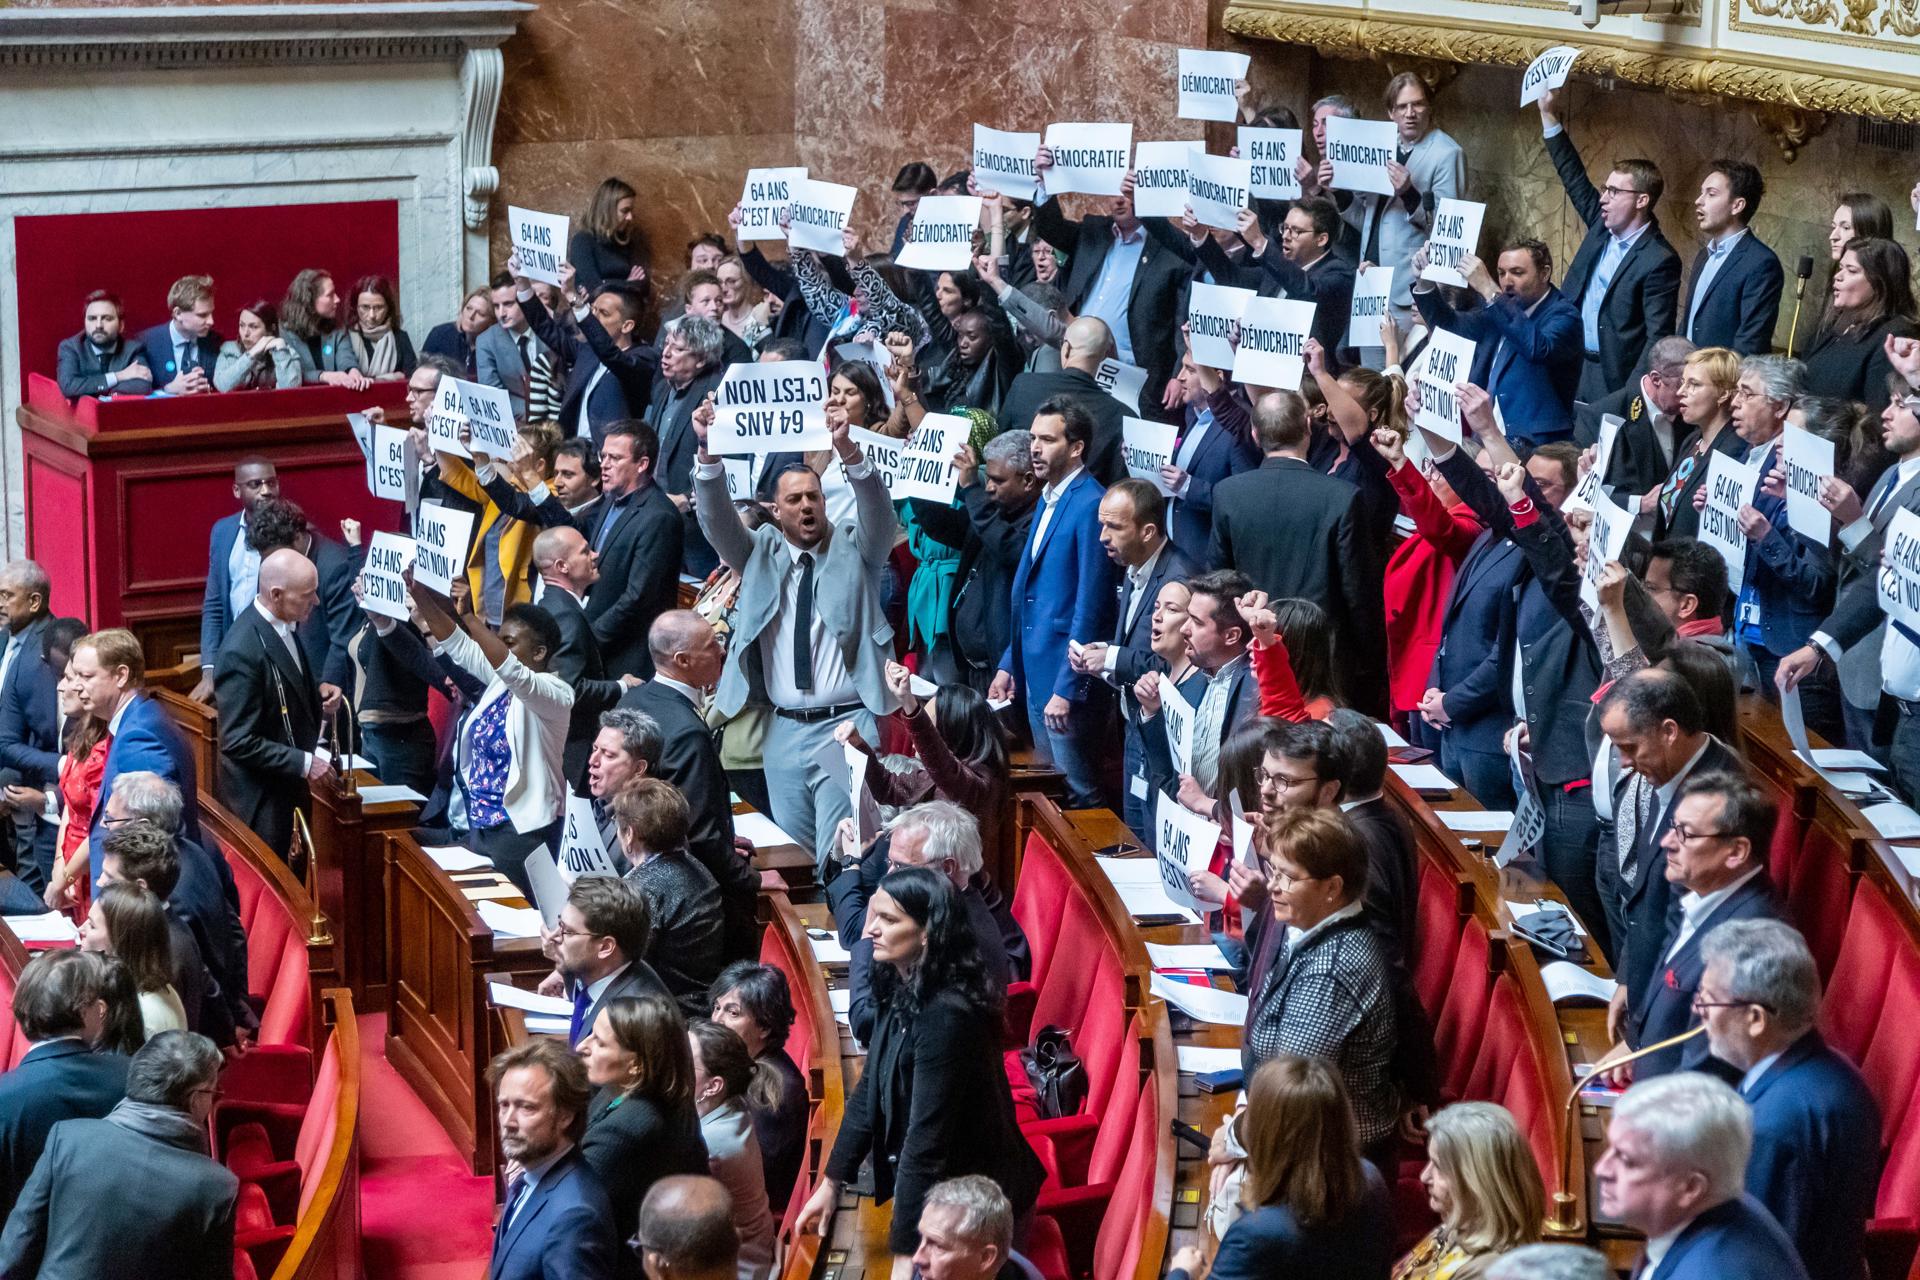 French Deputies of NUPES coalition (New Ecological and Social Union) show posters reading 'No to 64 years old' at the National Assembly in Paris, France, 16 March 2023. EFE/EPA/CHRISTOPHE PETIT TESSON